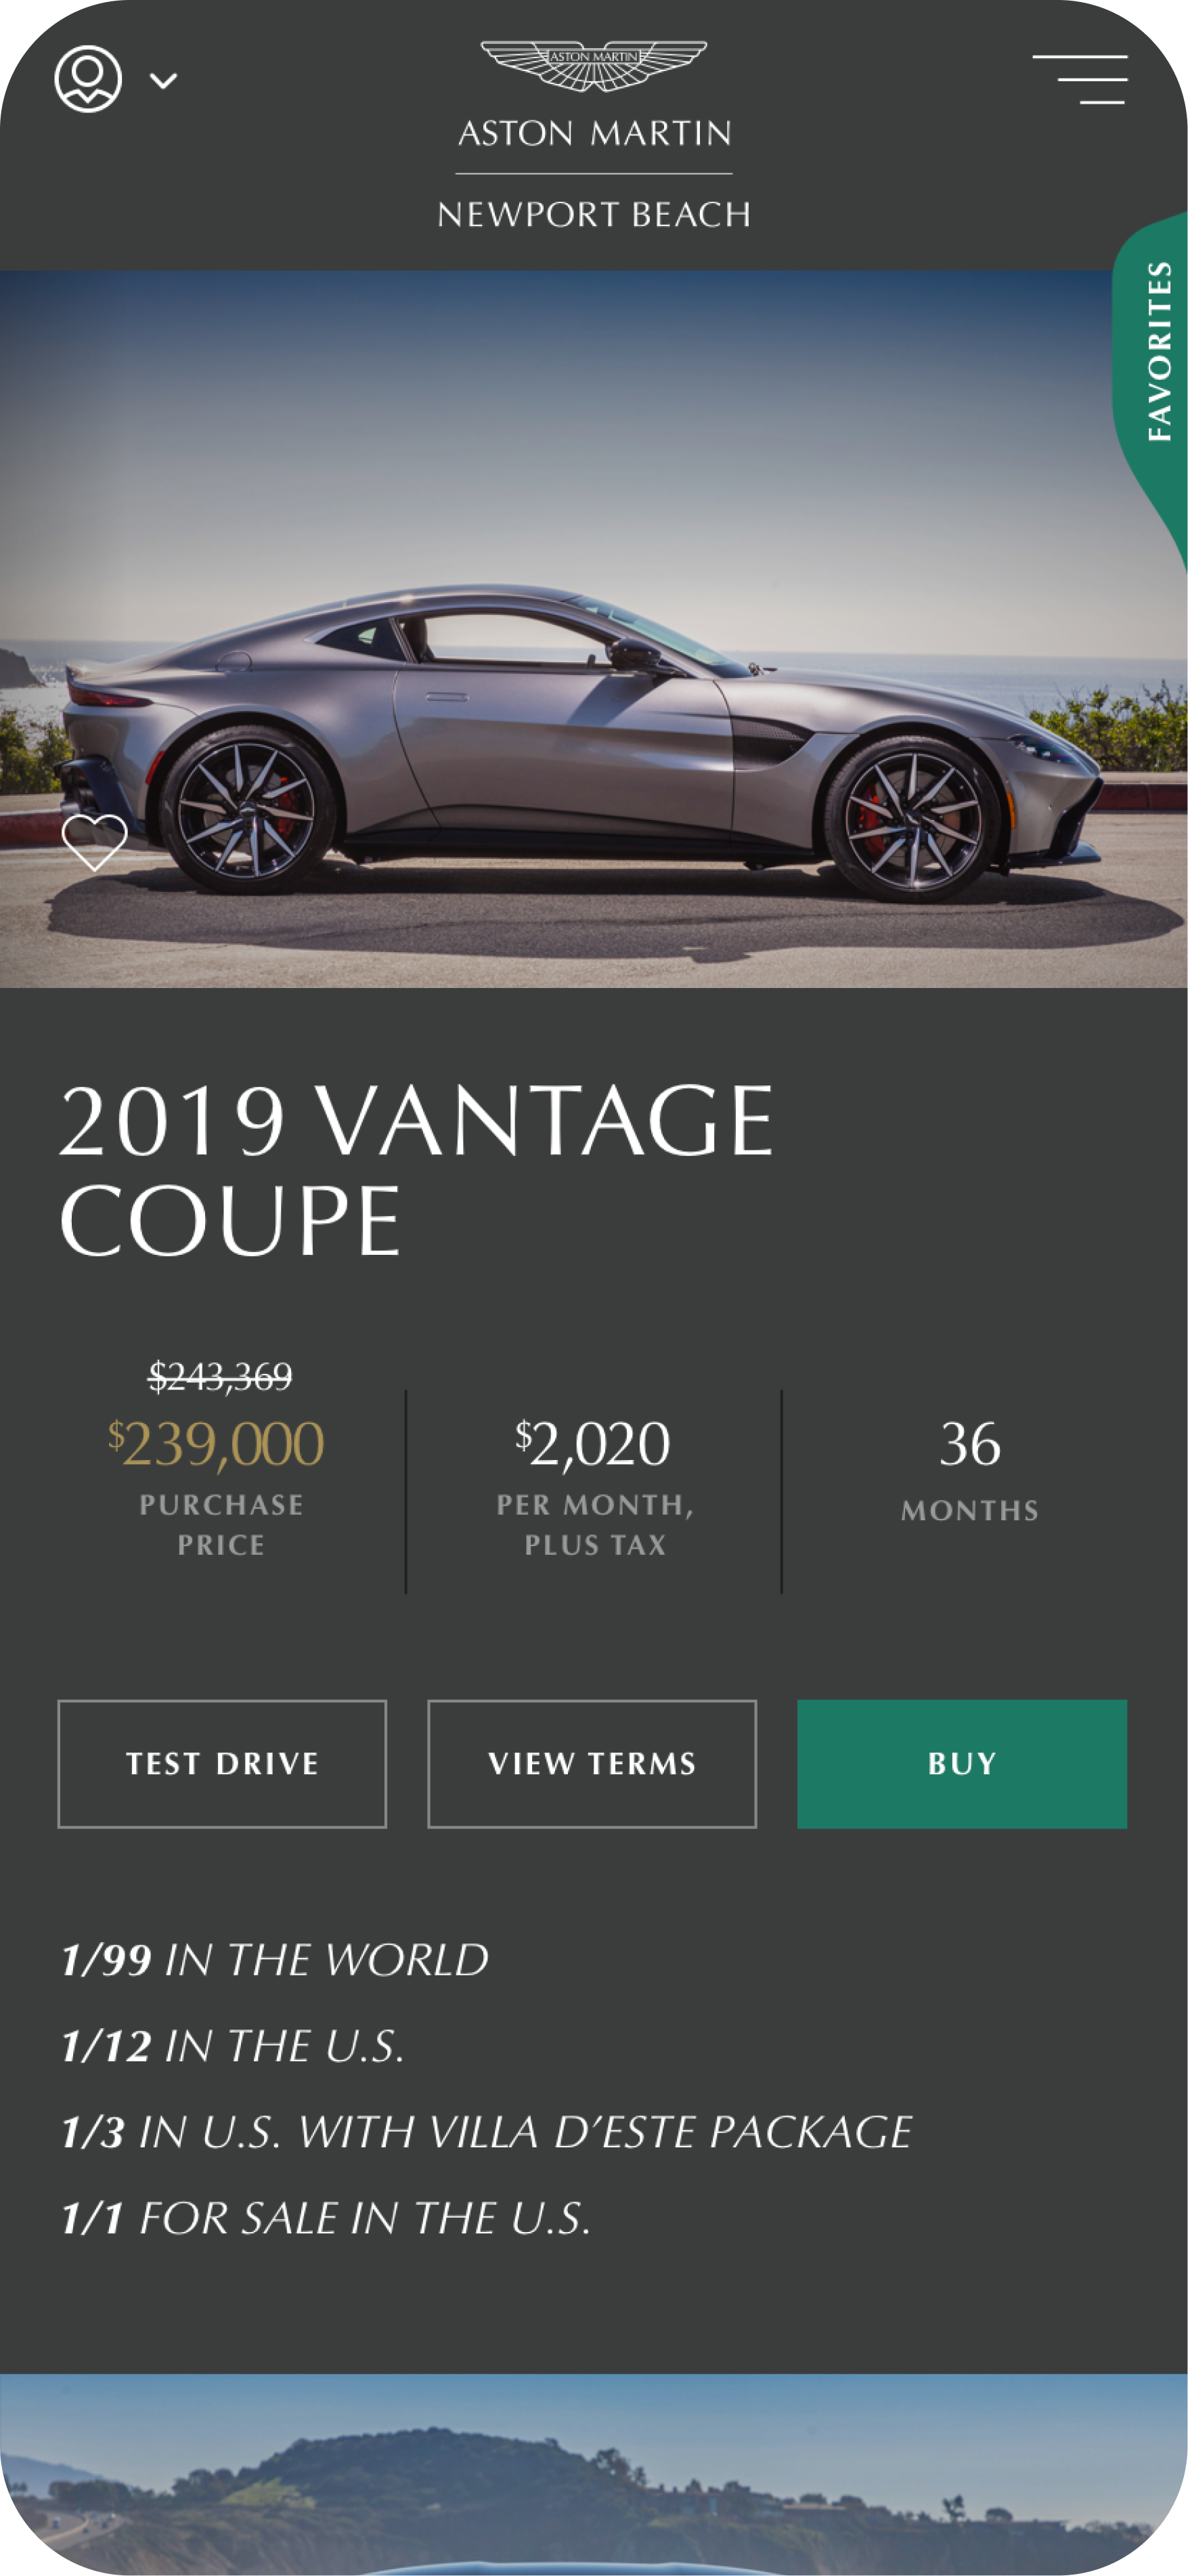 product detail page for a 2019 Vantage Coupe